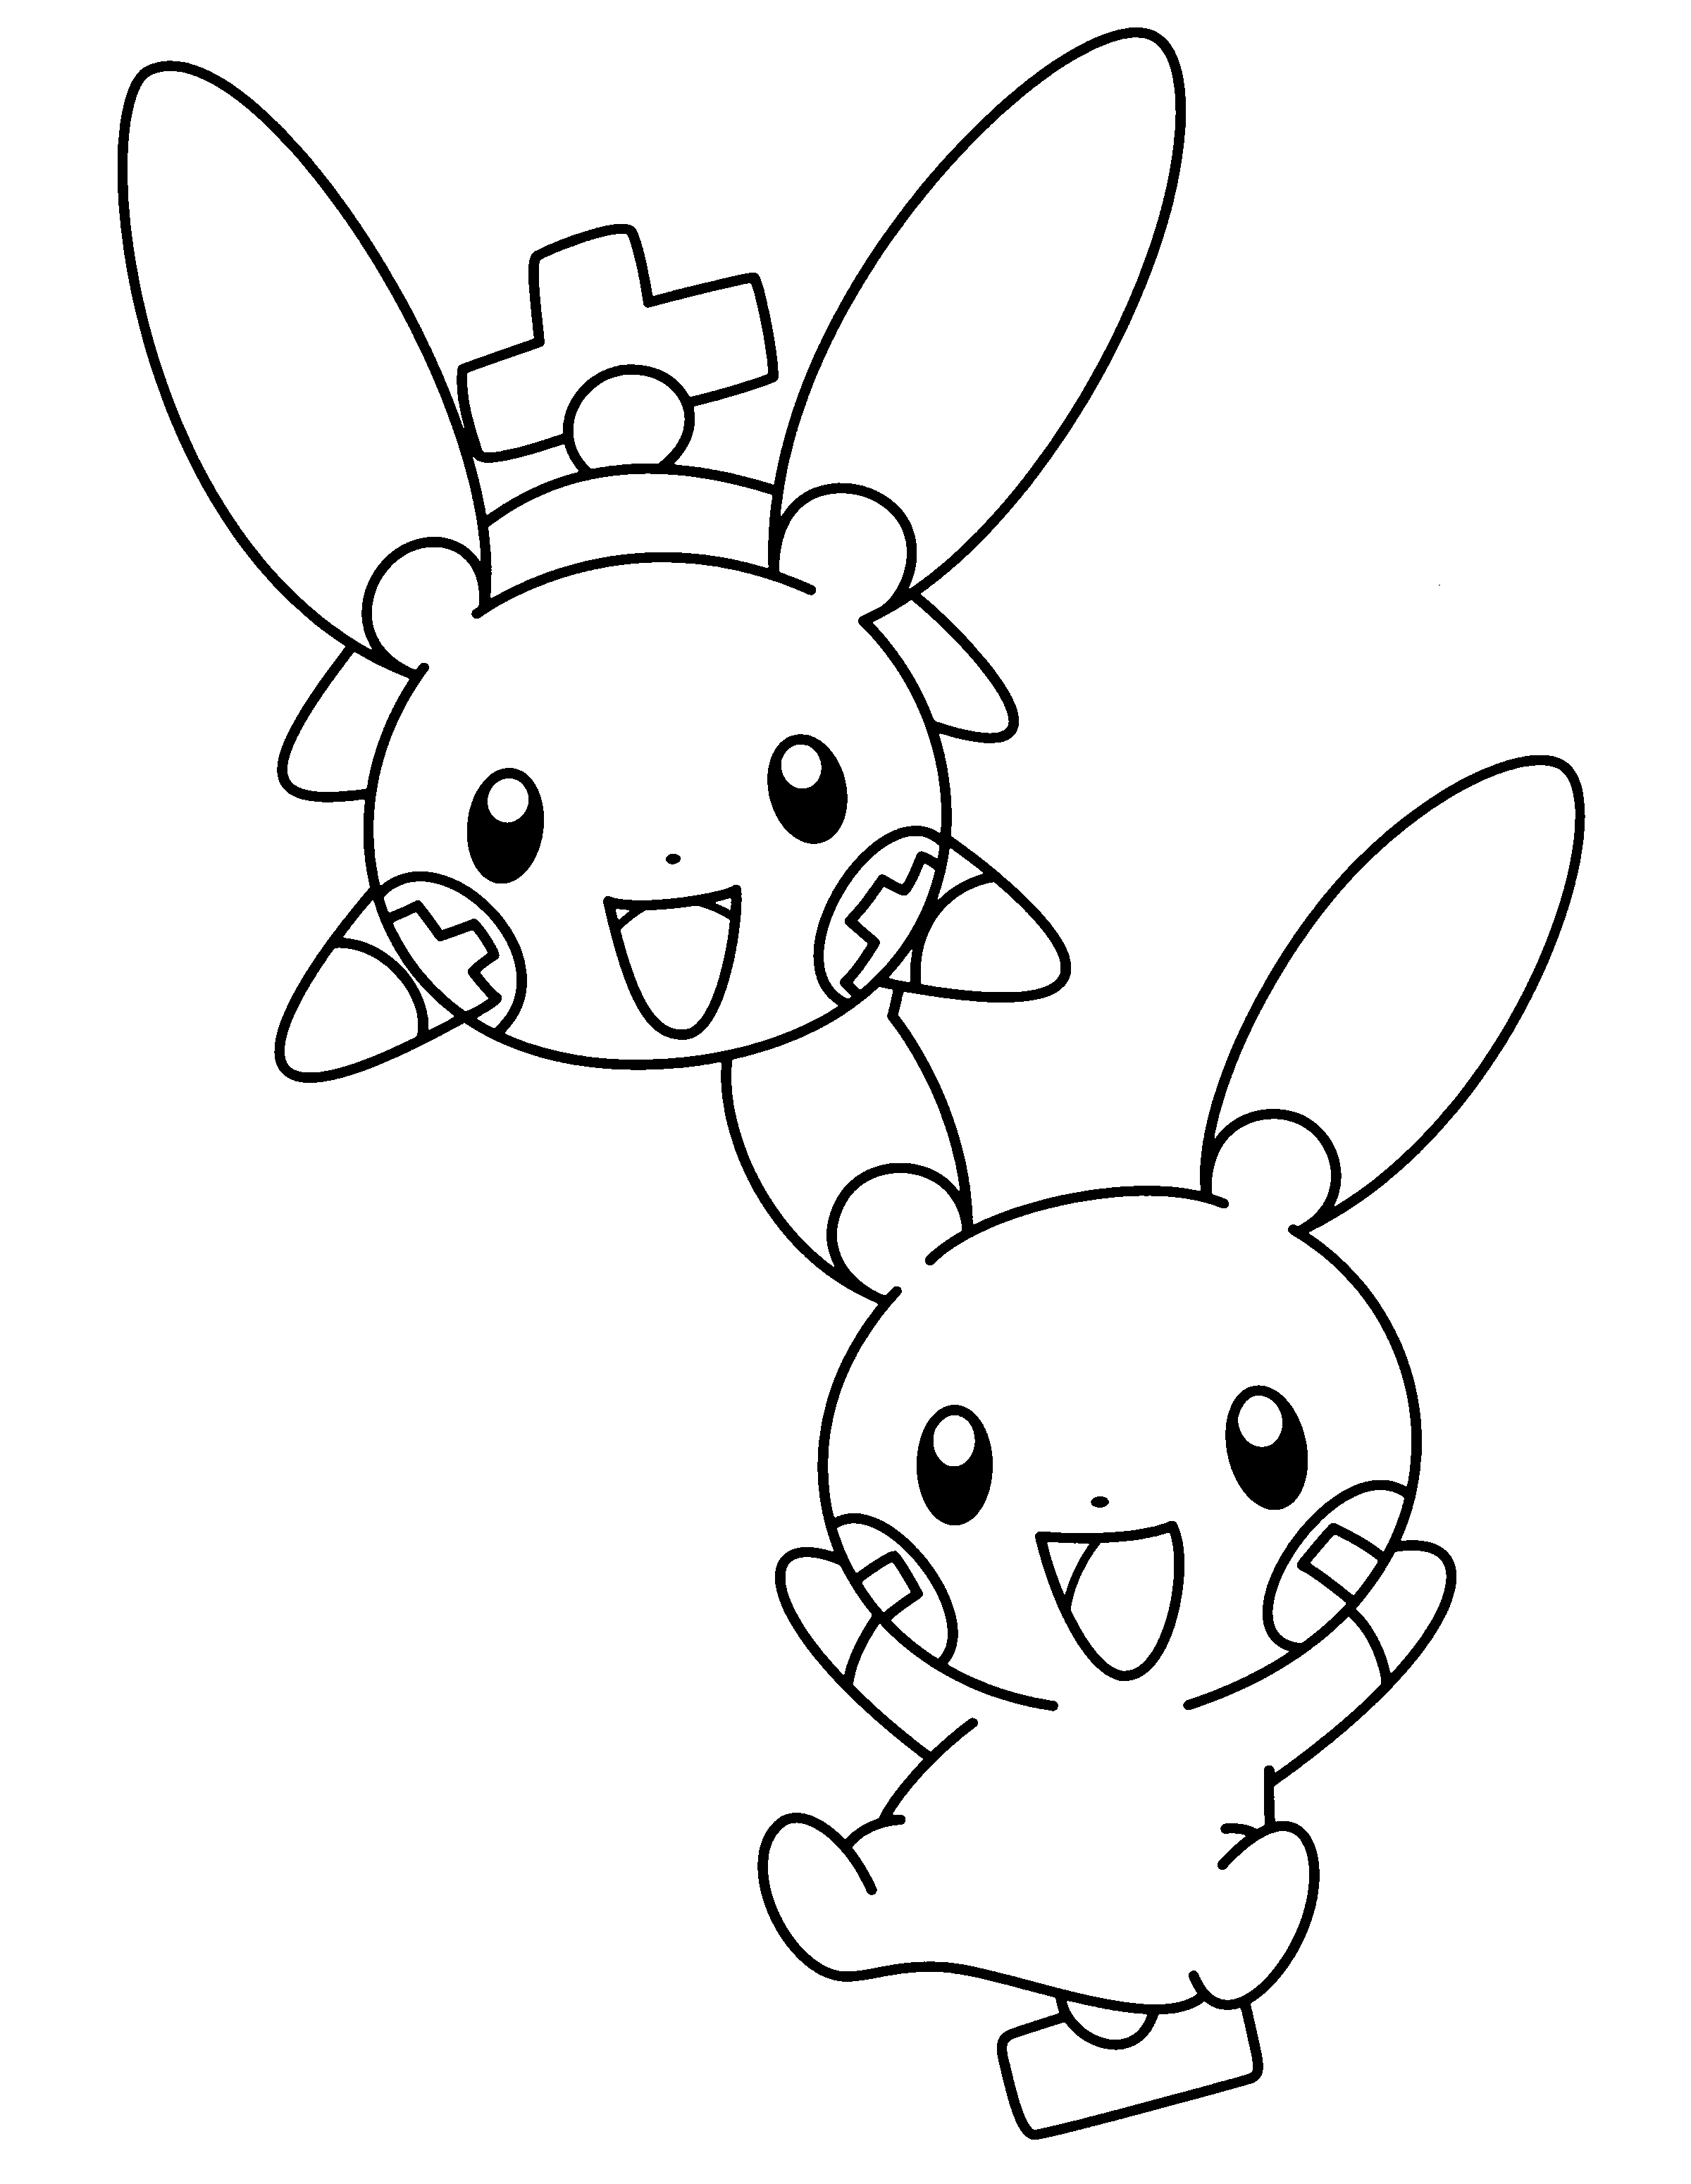 18-pokemon-coloring-pages-cute-images-coloring-pages-2020